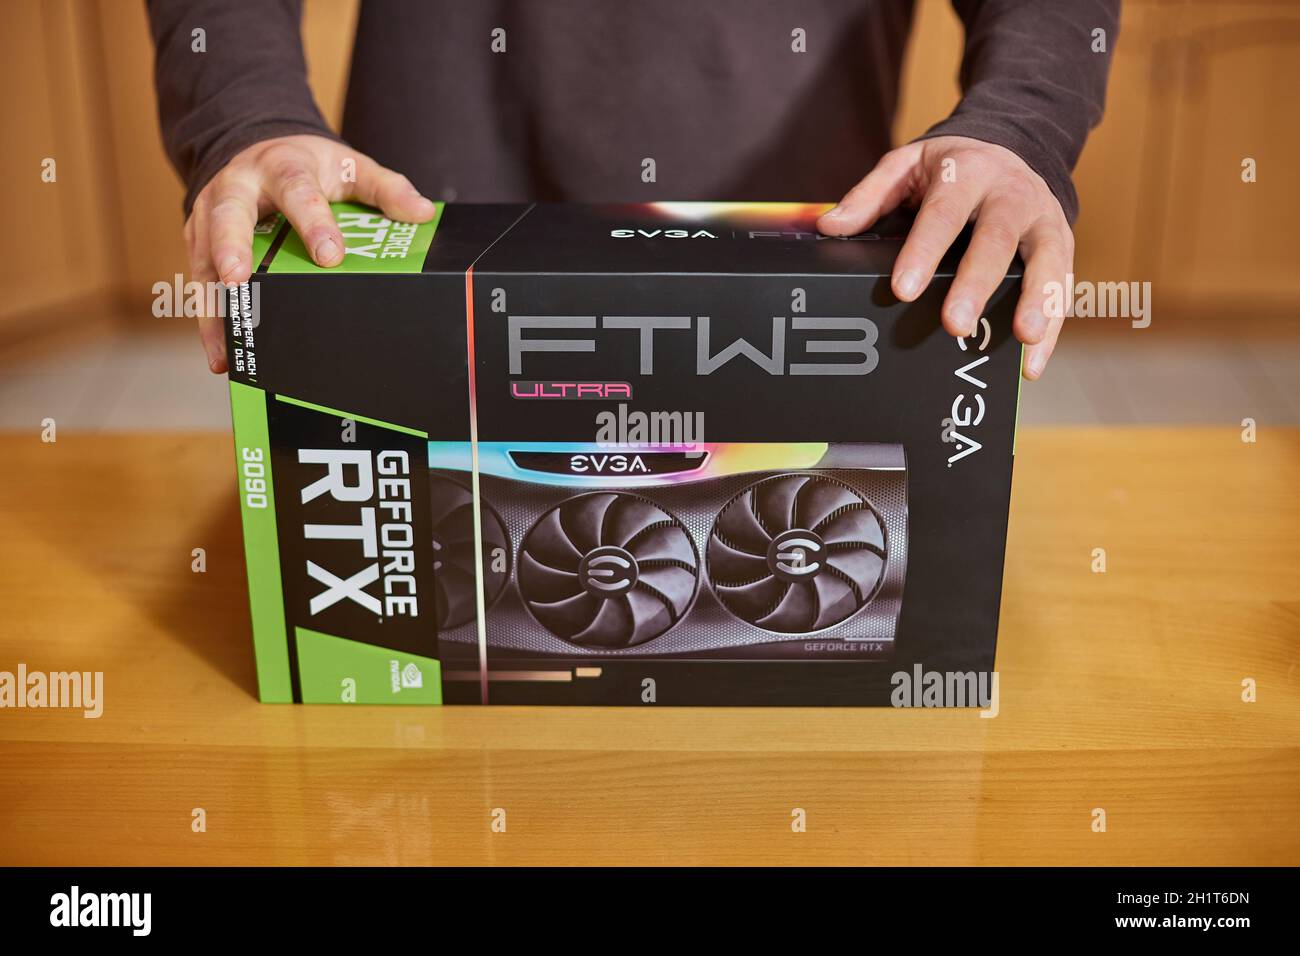 Meningsfuld renhed score Budapest, Hungary - Circa 2020: Buying an Nvidia Geforce RTX 3090 Graphics  Card made by EVGA in its box. High end GPU of the Nvidia RTX 30 series hard  Stock Photo - Alamy